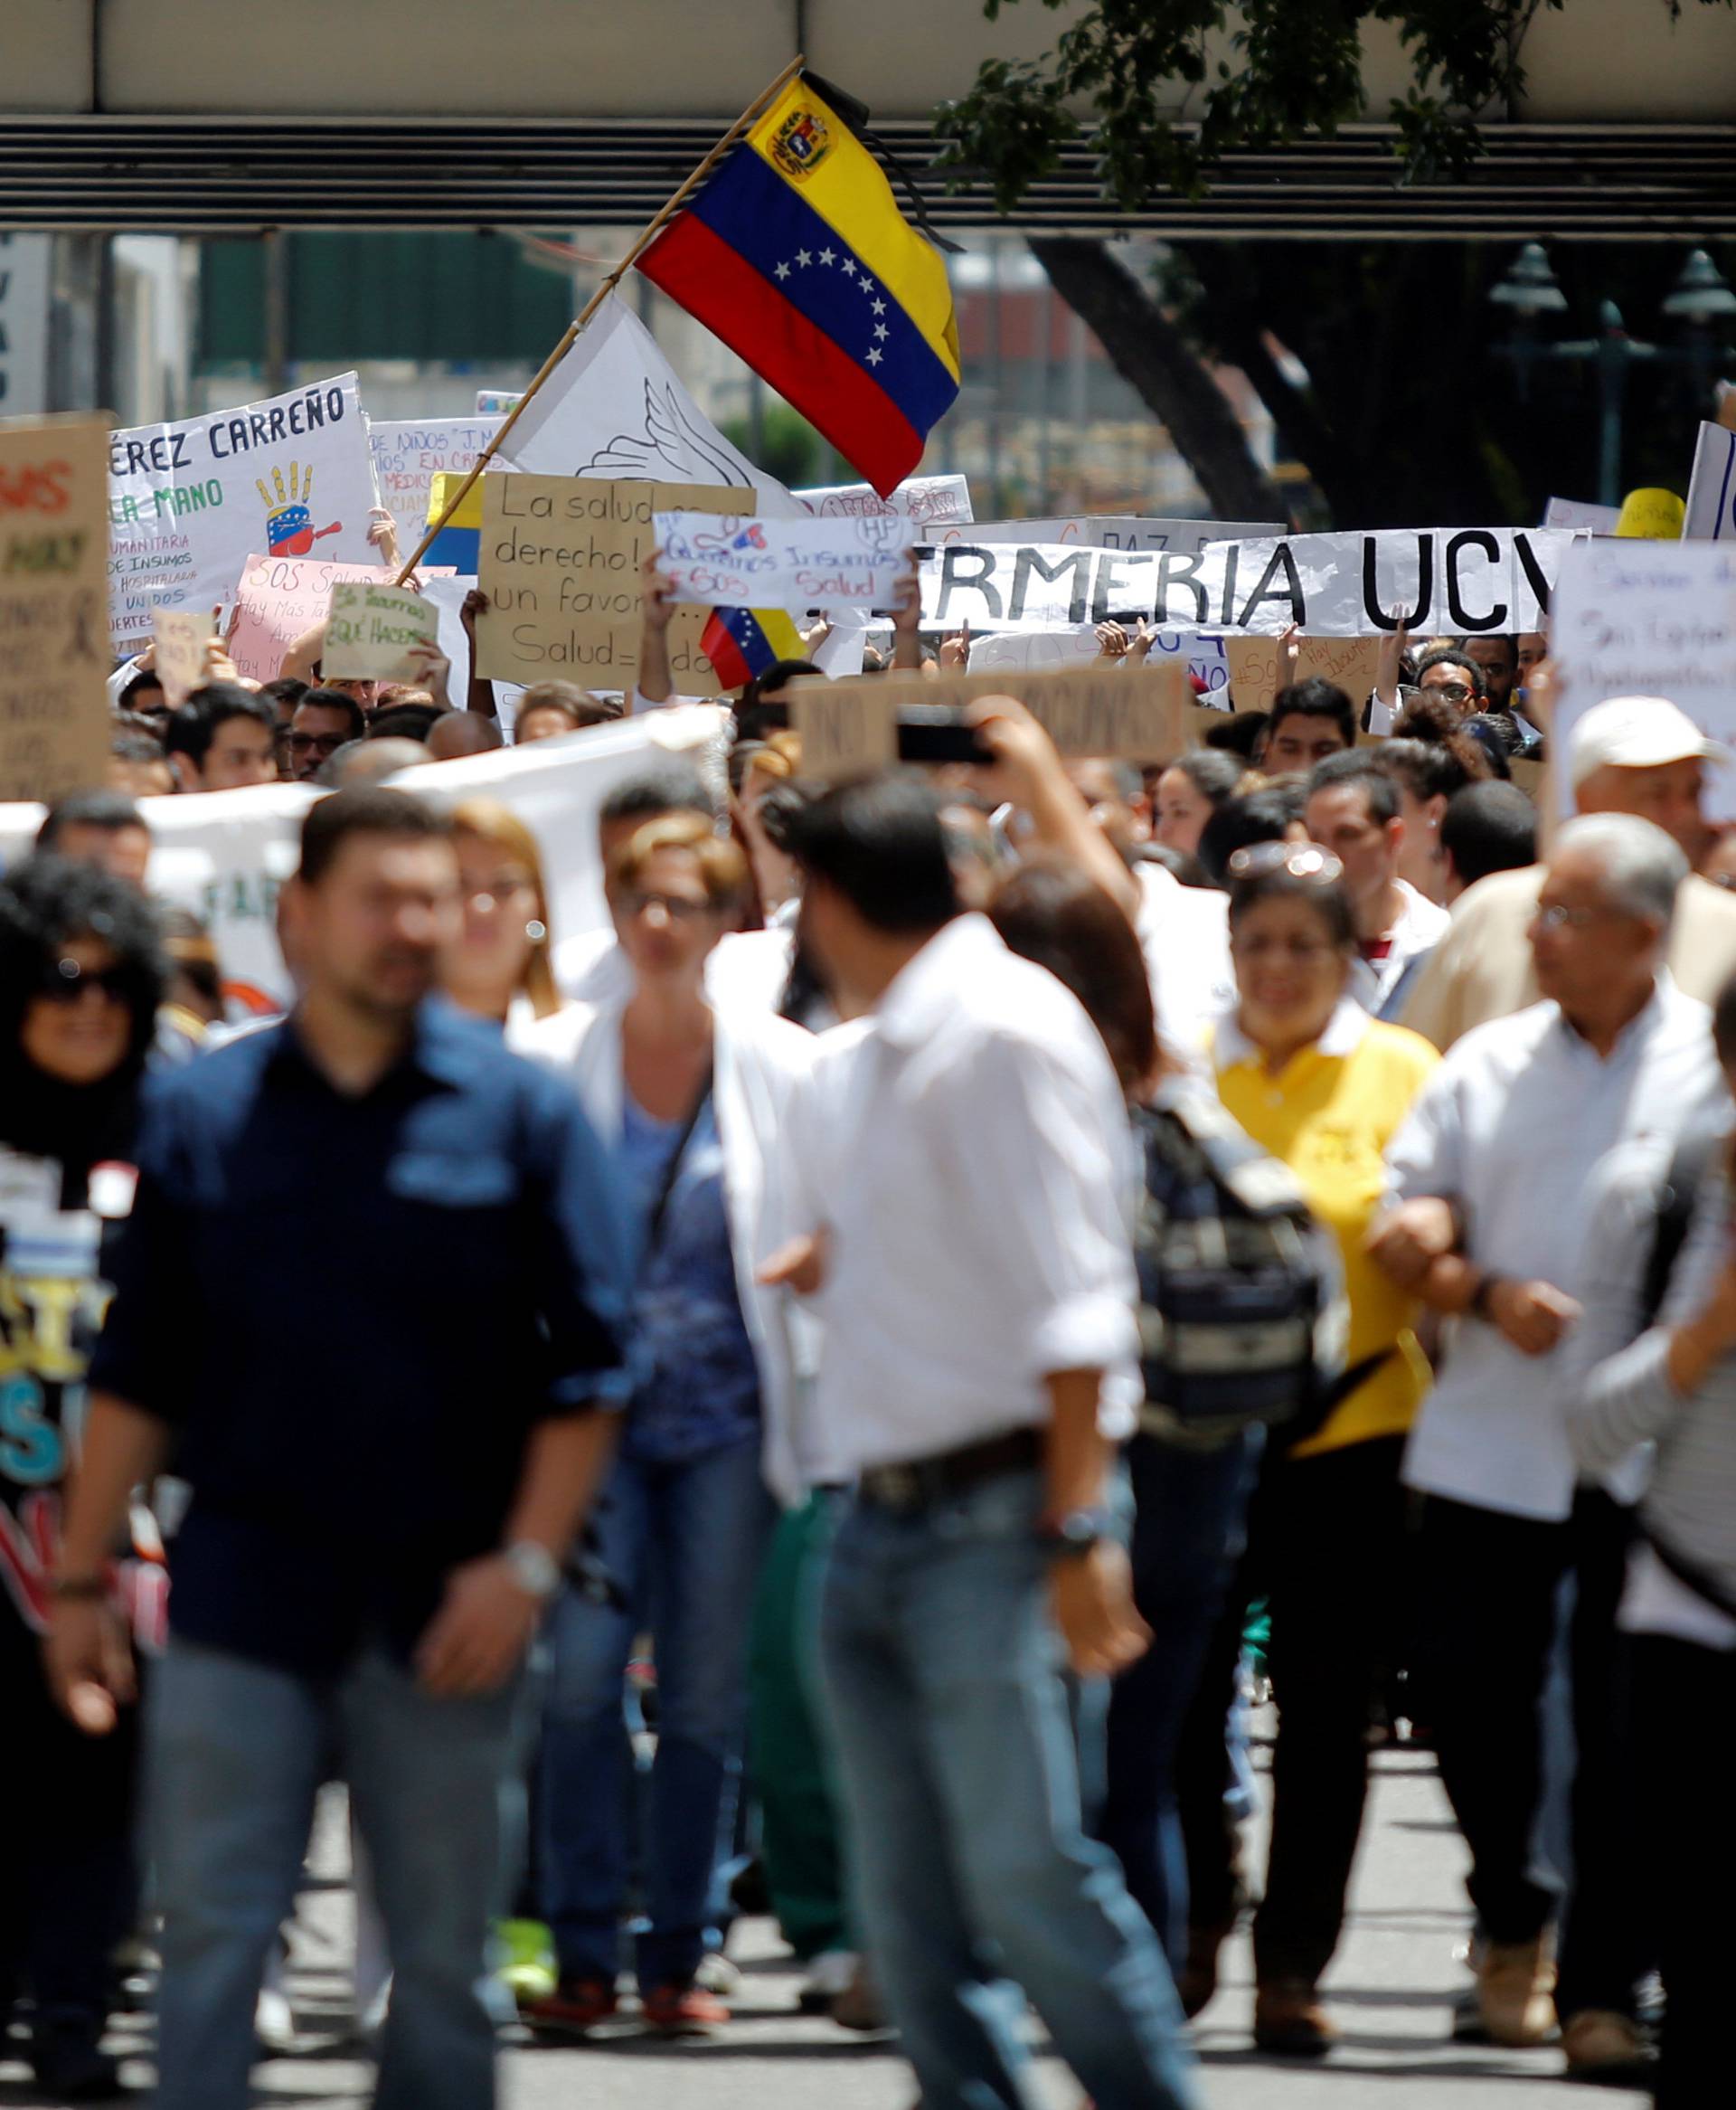 Workers of the health sector and opposition supporters take part in a protest against President Nicolas Maduro's government in Caracas